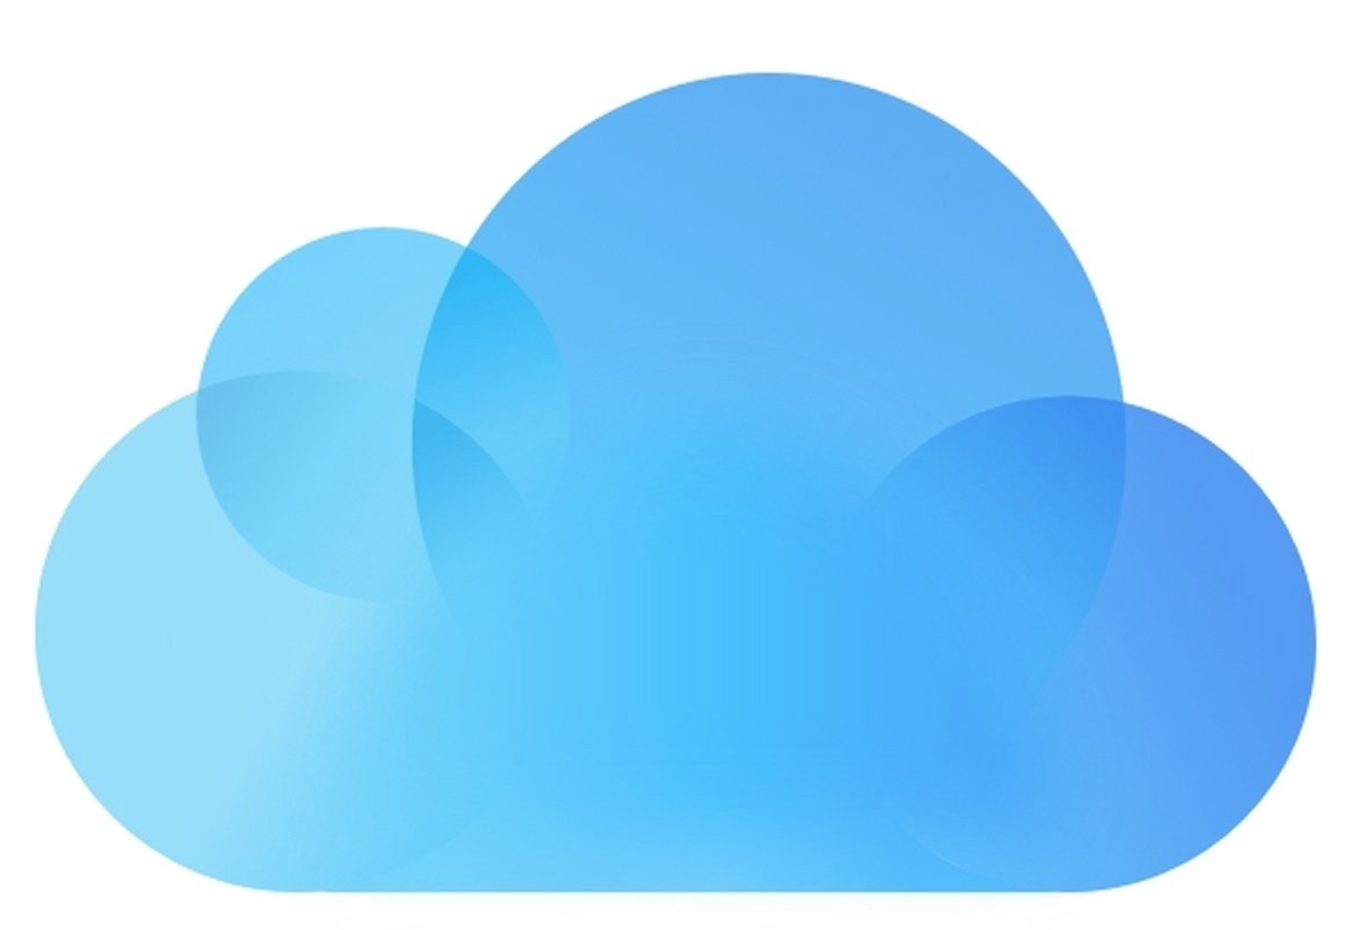 Apple Reportedly Uses Google Servers to Store Around 8 Million Terabytes of iCloud Data